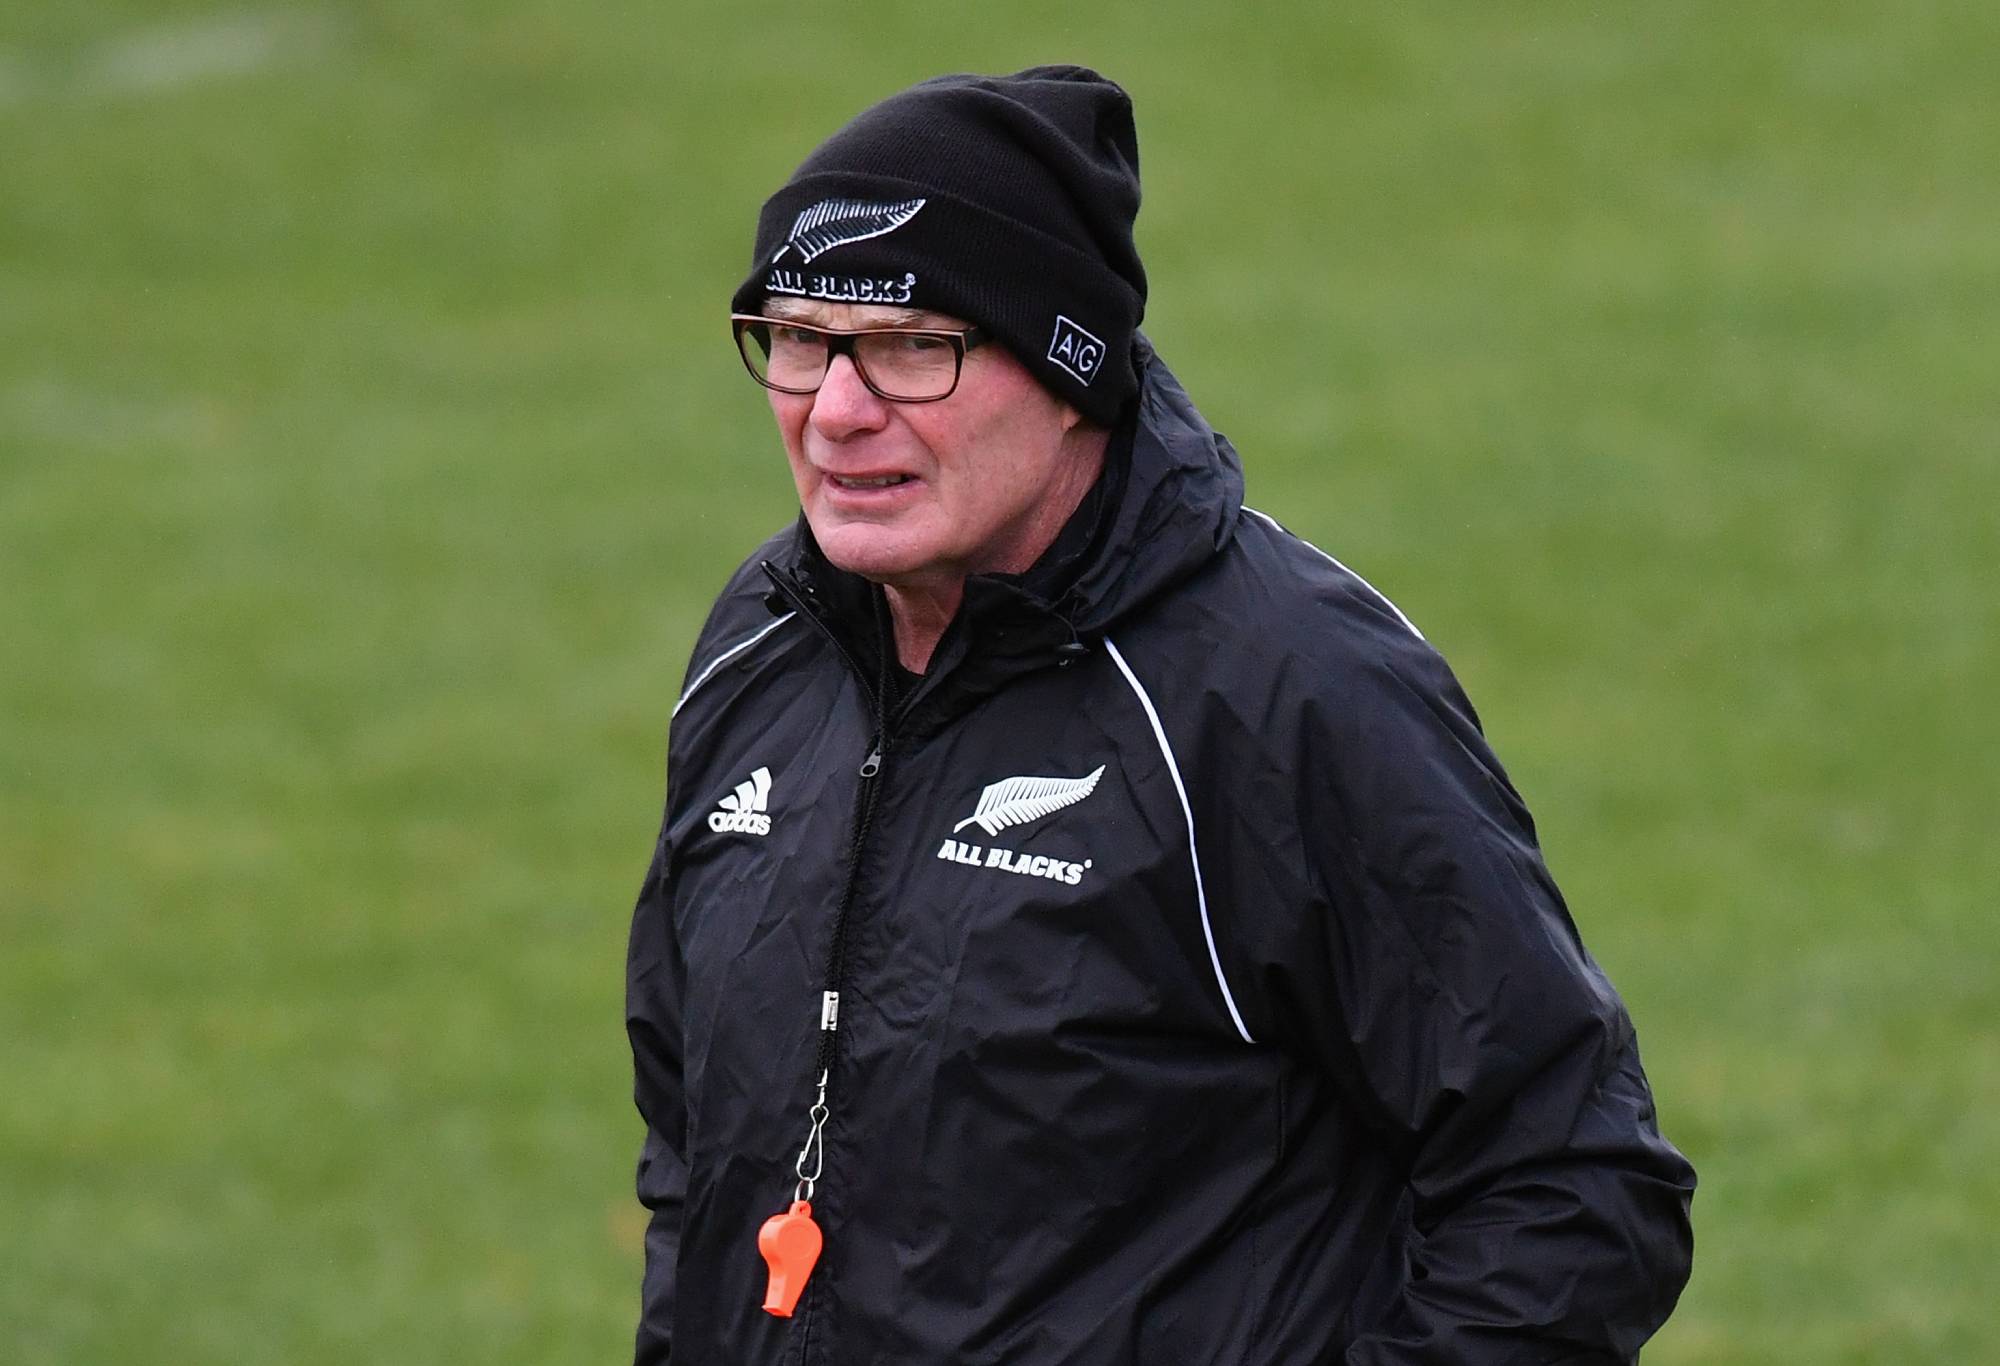 Assistant Coach Mike Cron looks on during a New Zealand All Blacks training session at Linwood Rugby Club on May 29, 2018 in Christchurch, New Zealand. (Photo by Kai Schwoerer/Getty Images)